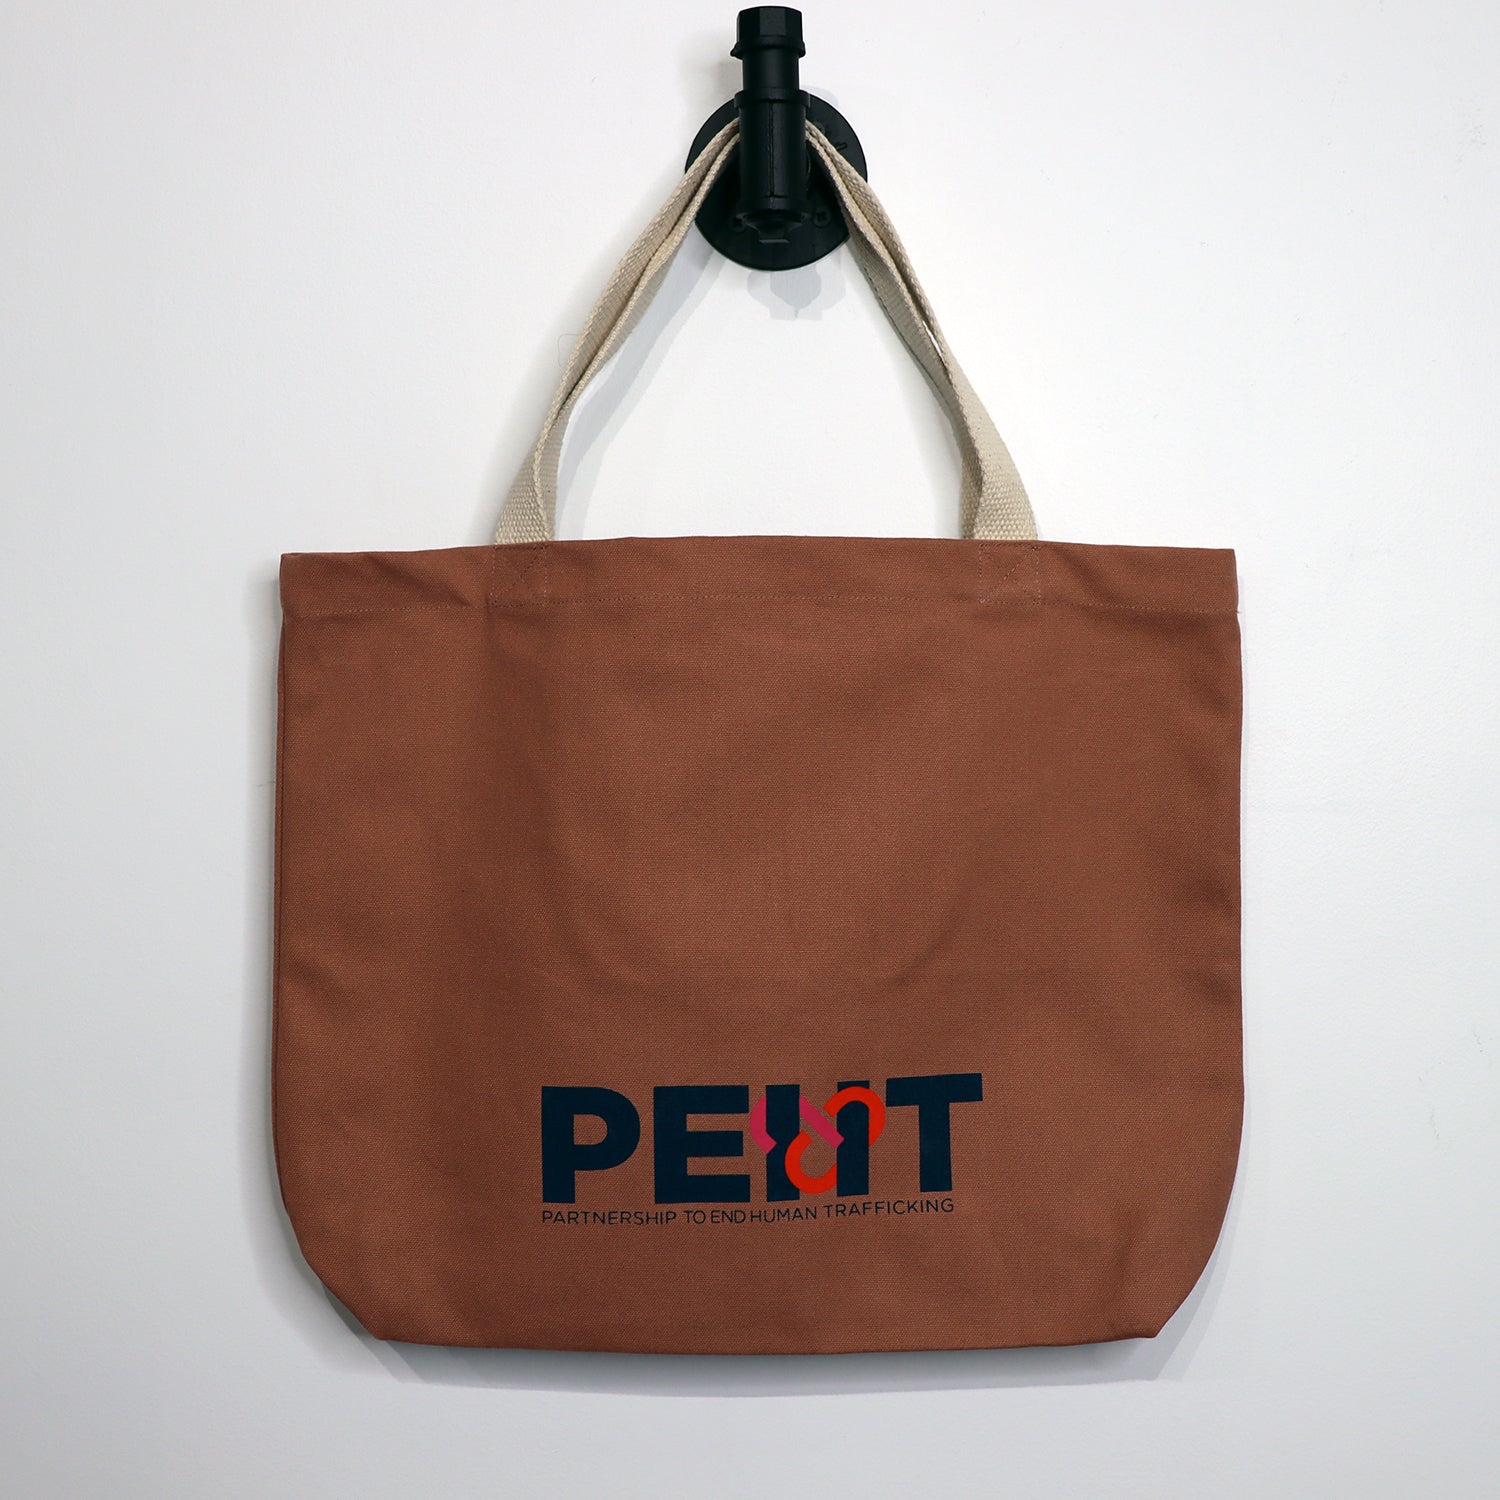 Tote Bags - New Style